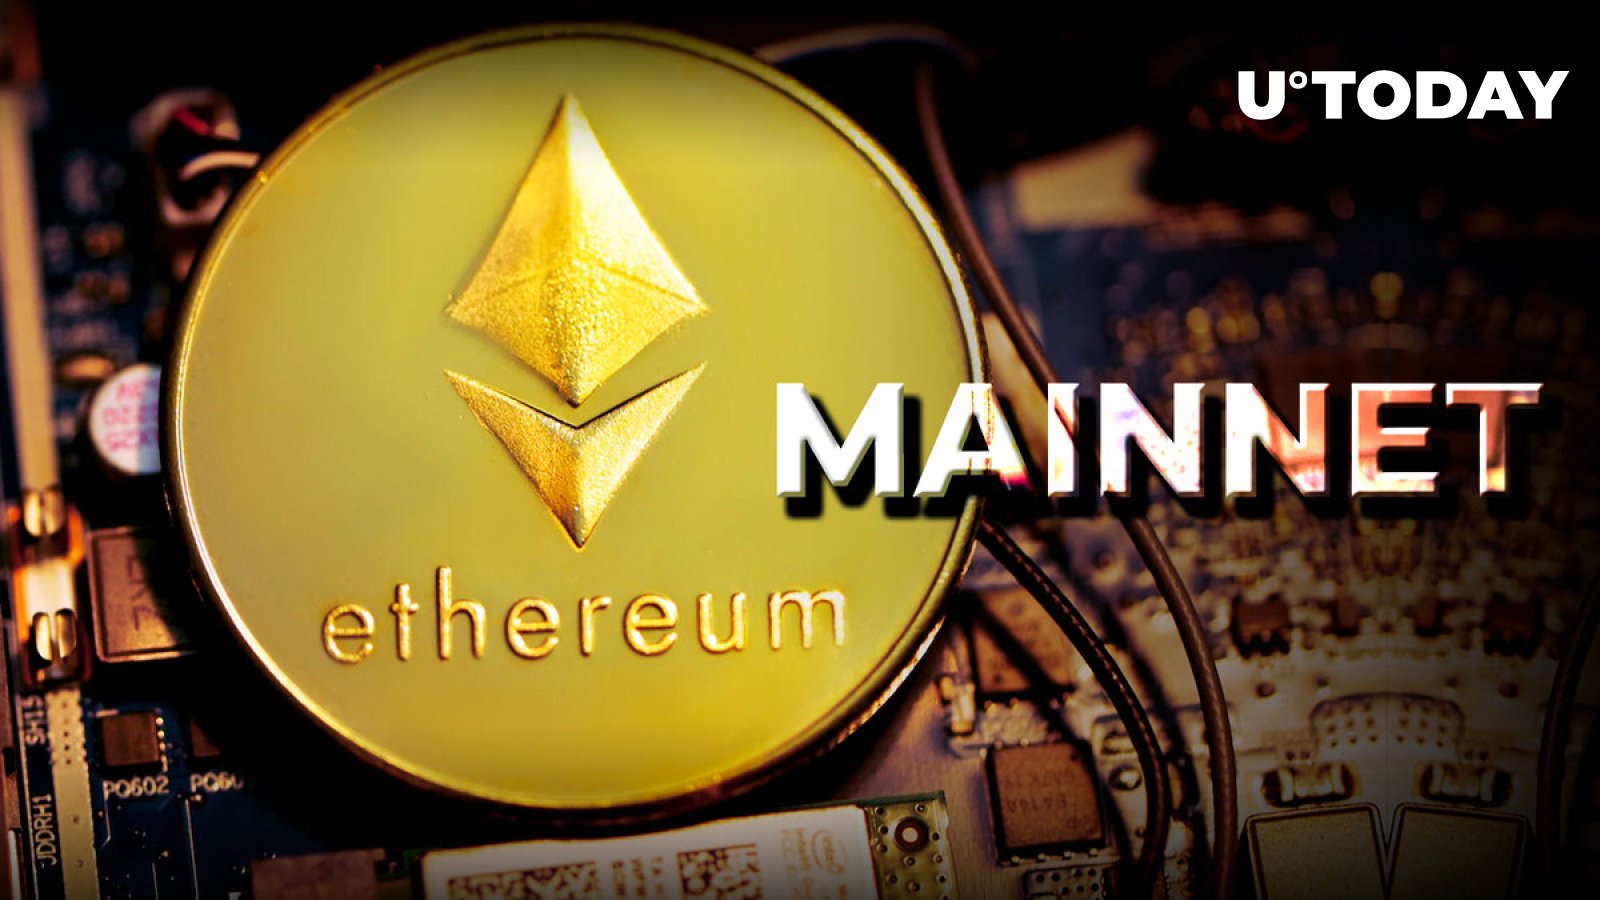 EthereumPoW (ETHW) Finally Releases Mainnet Launch Plan